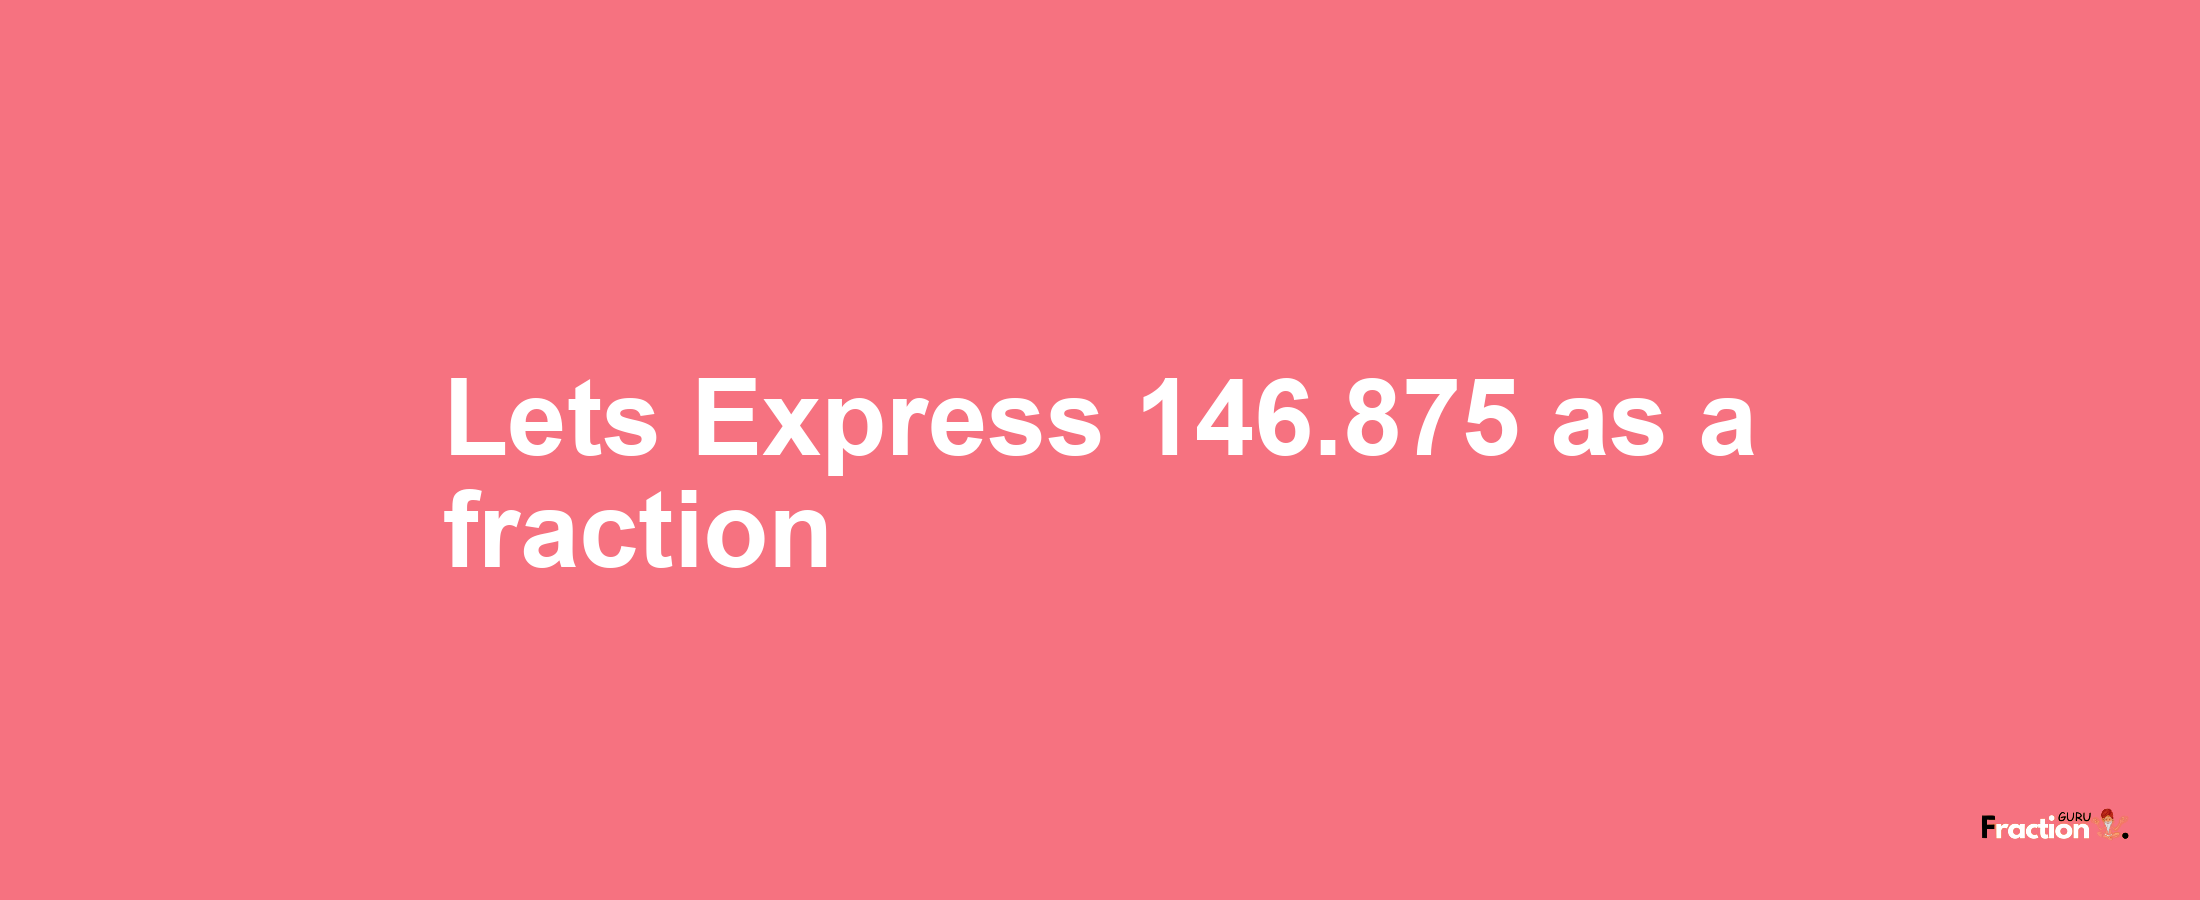 Lets Express 146.875 as afraction